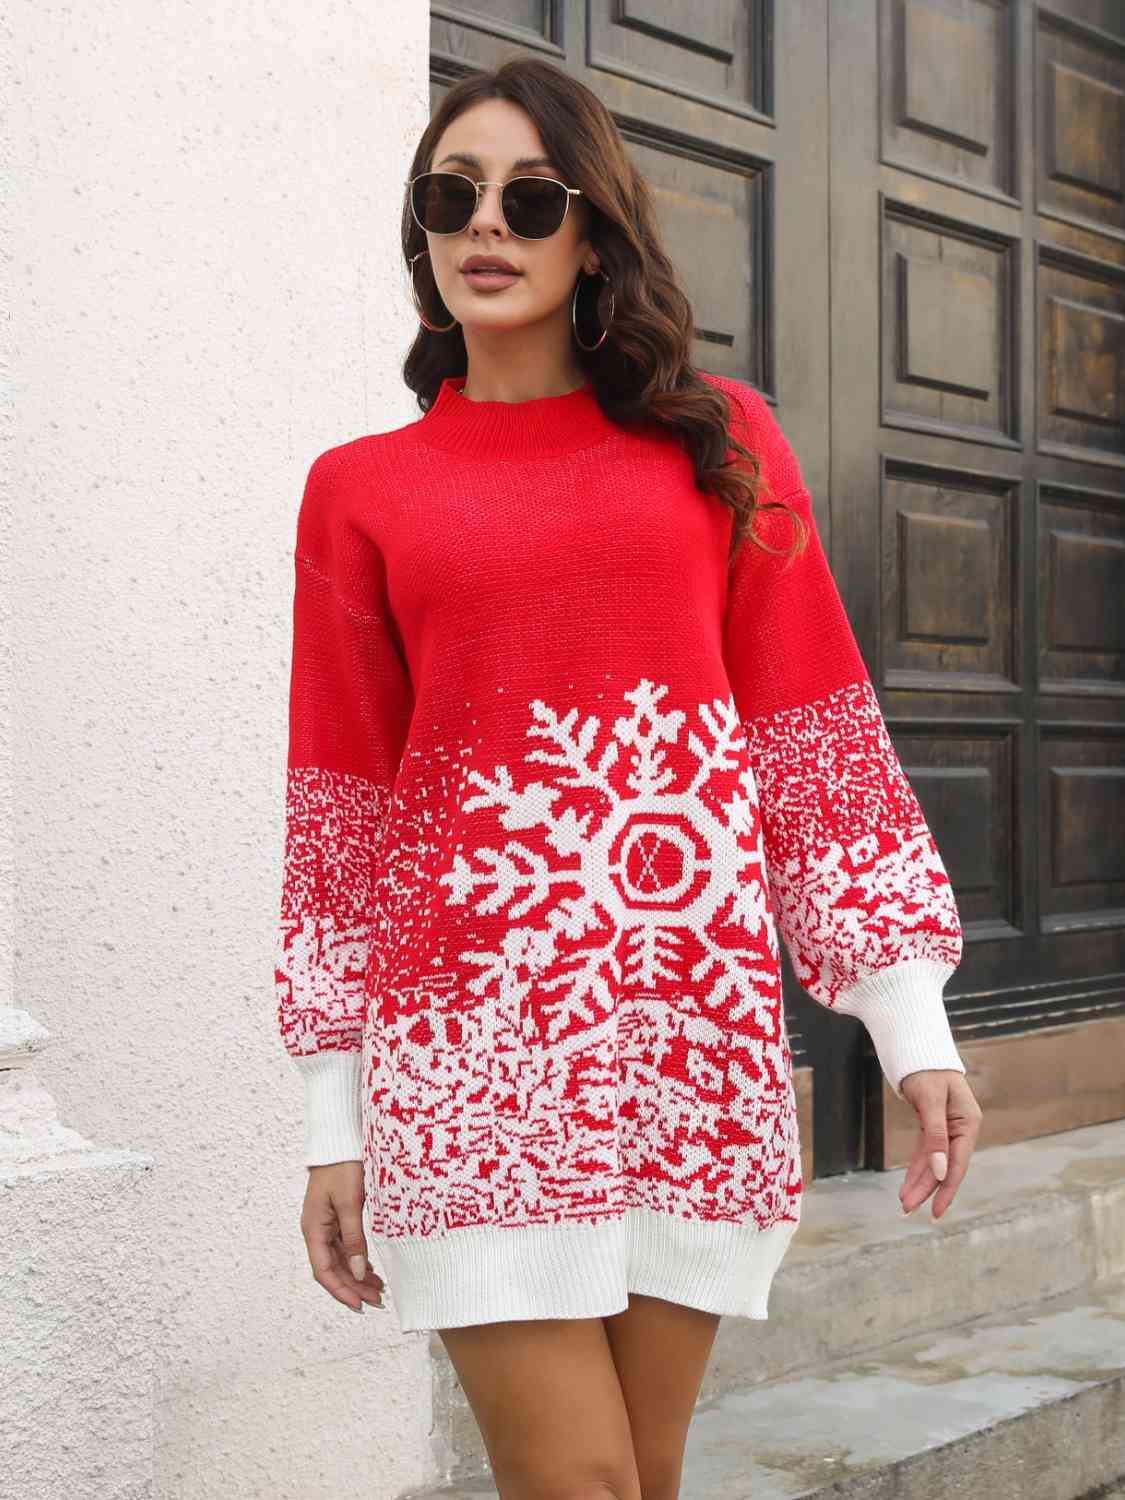 Snowflake Pattern Sweater Dress - Red / S - All Dresses - Dresses - 4 - 2024